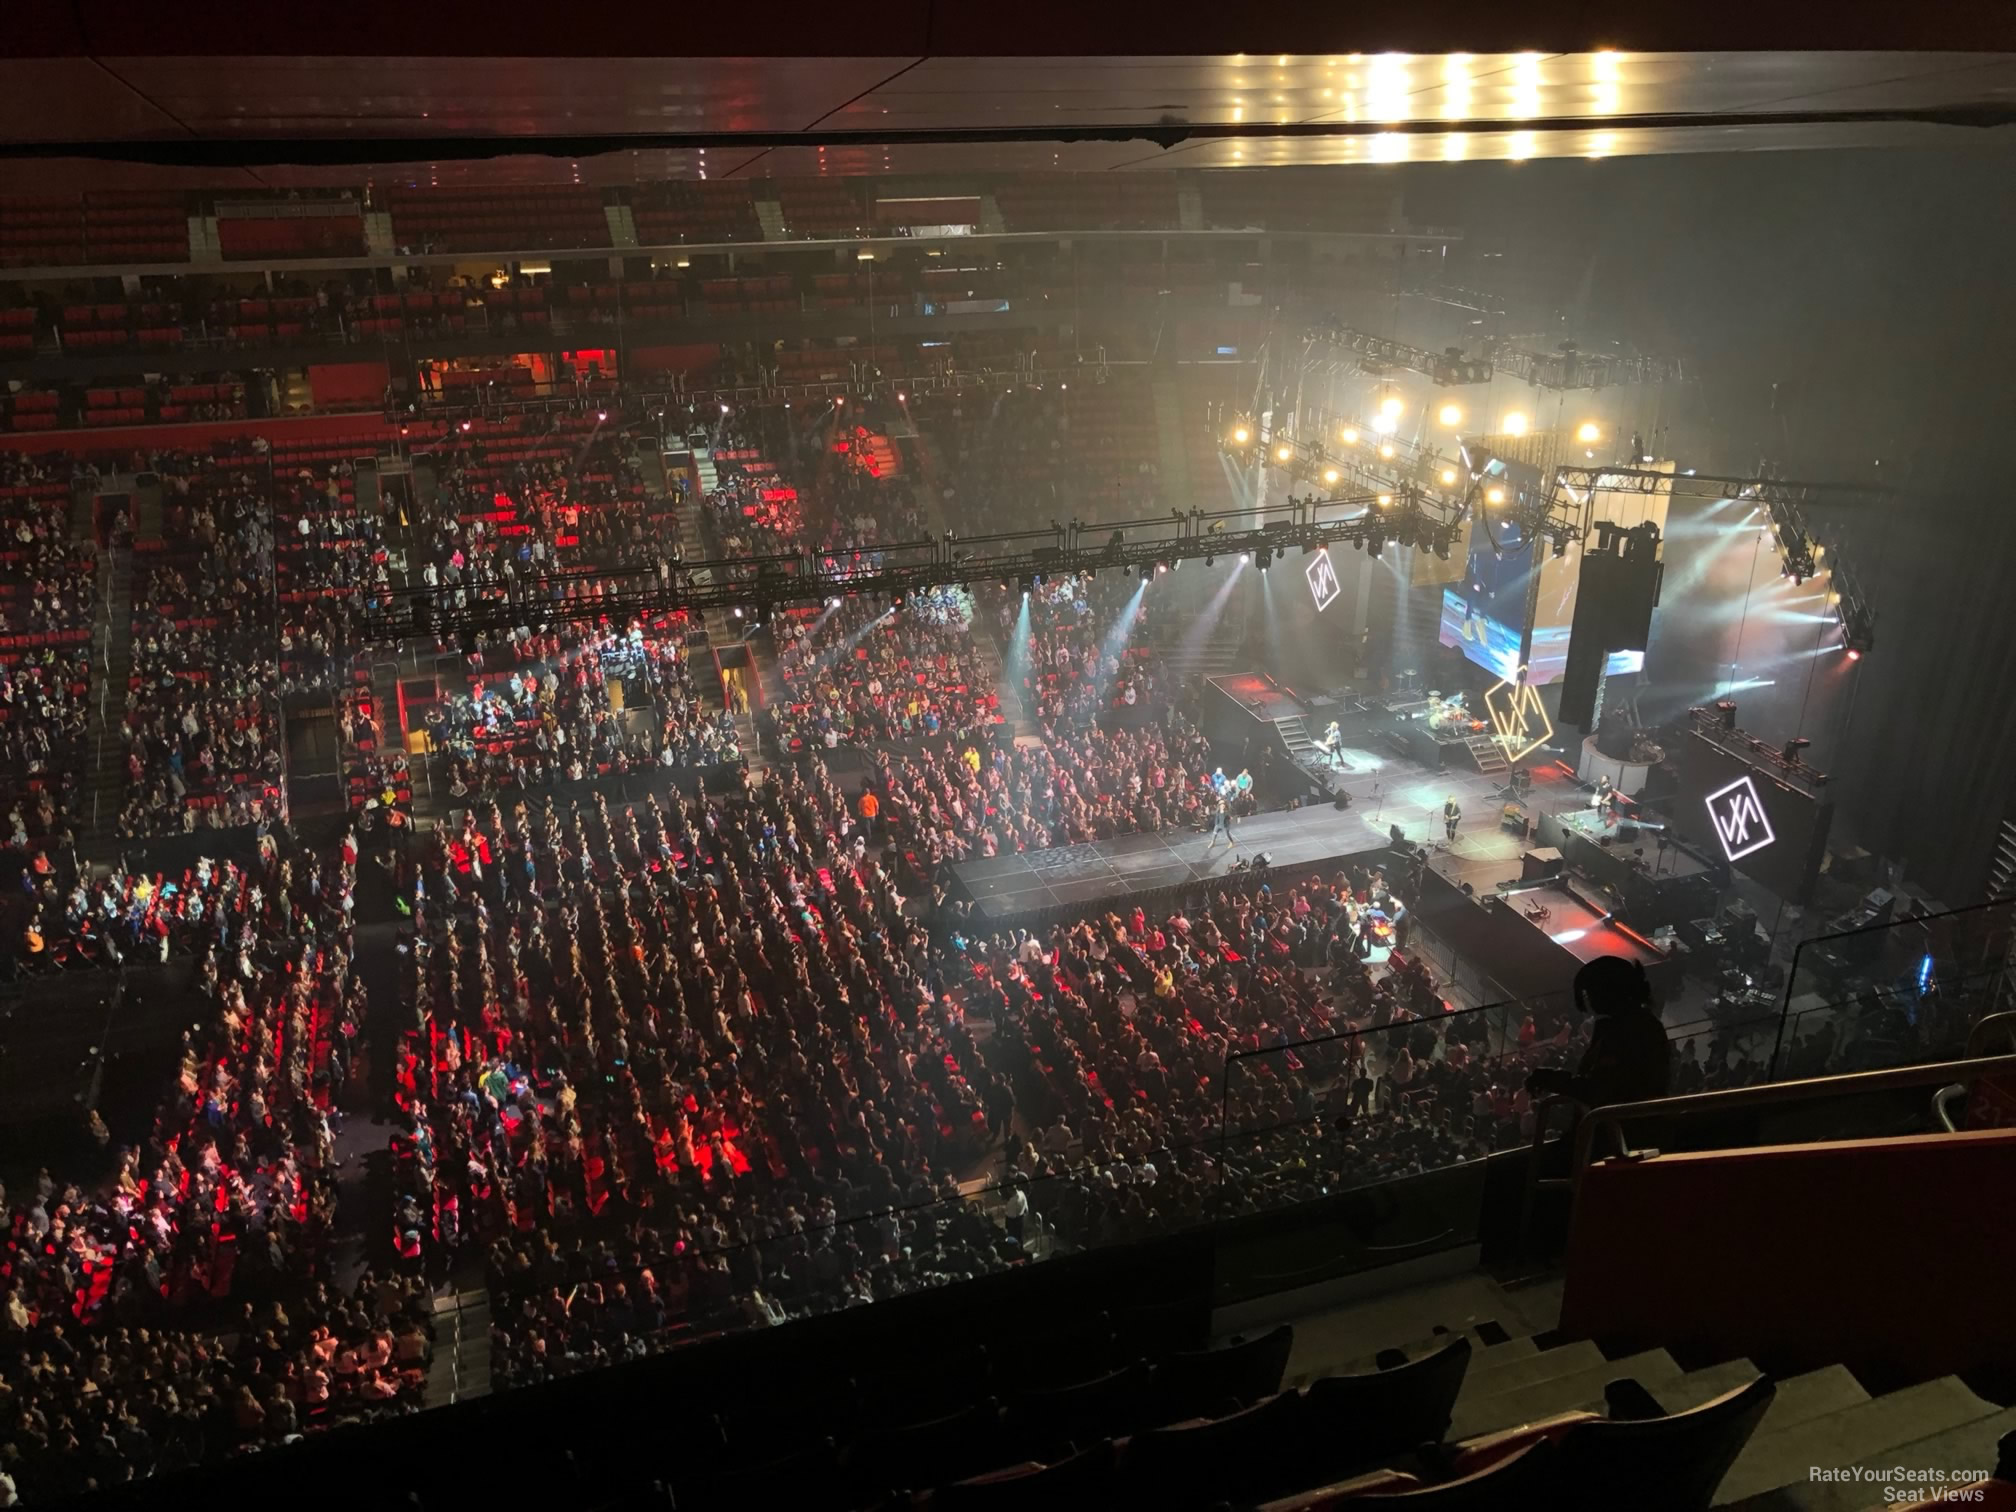 section 213, row 7 seat view  for concert - little caesars arena